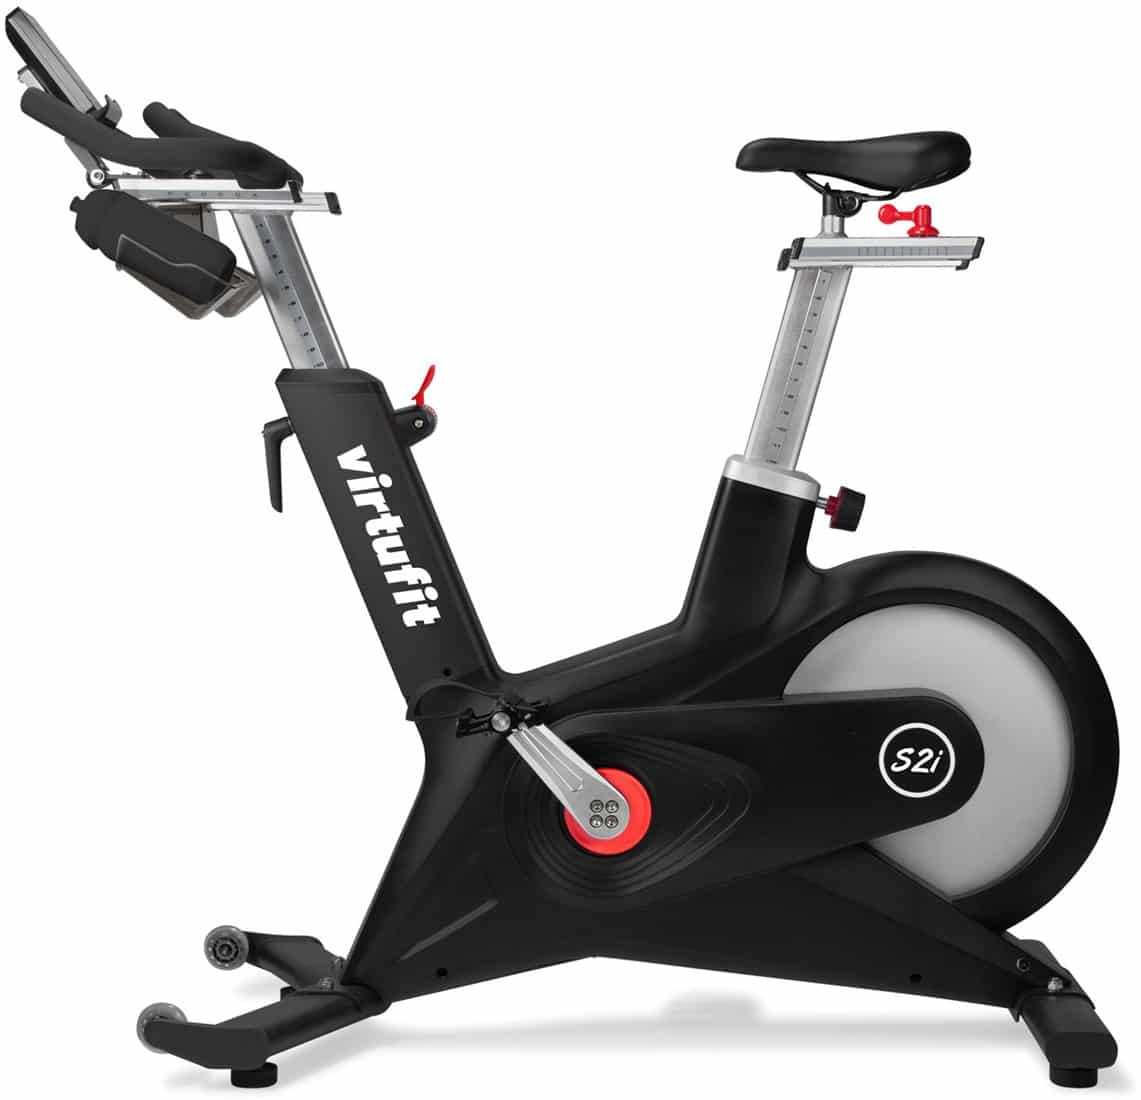 virtufit-indoor-cycle-s2i-spinbike-review